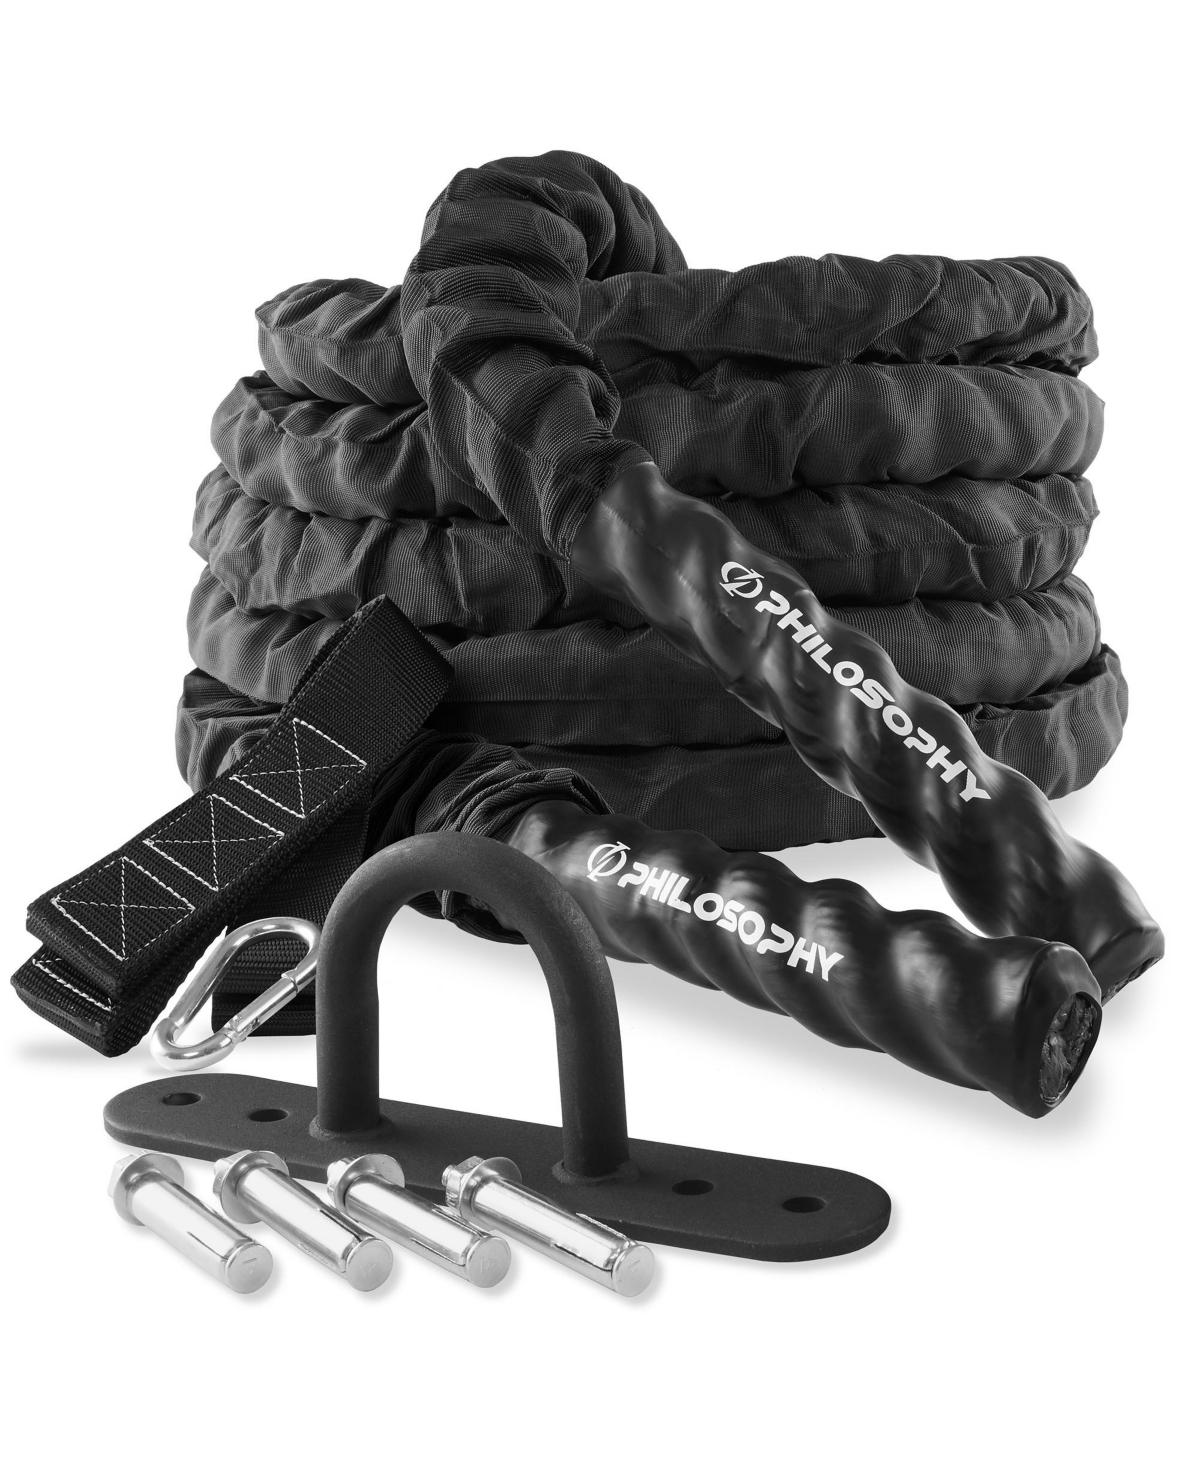 30 Foot Exercise Battle Rope 1.5 Inch Diameter with Cover and Anchor Kit - Black